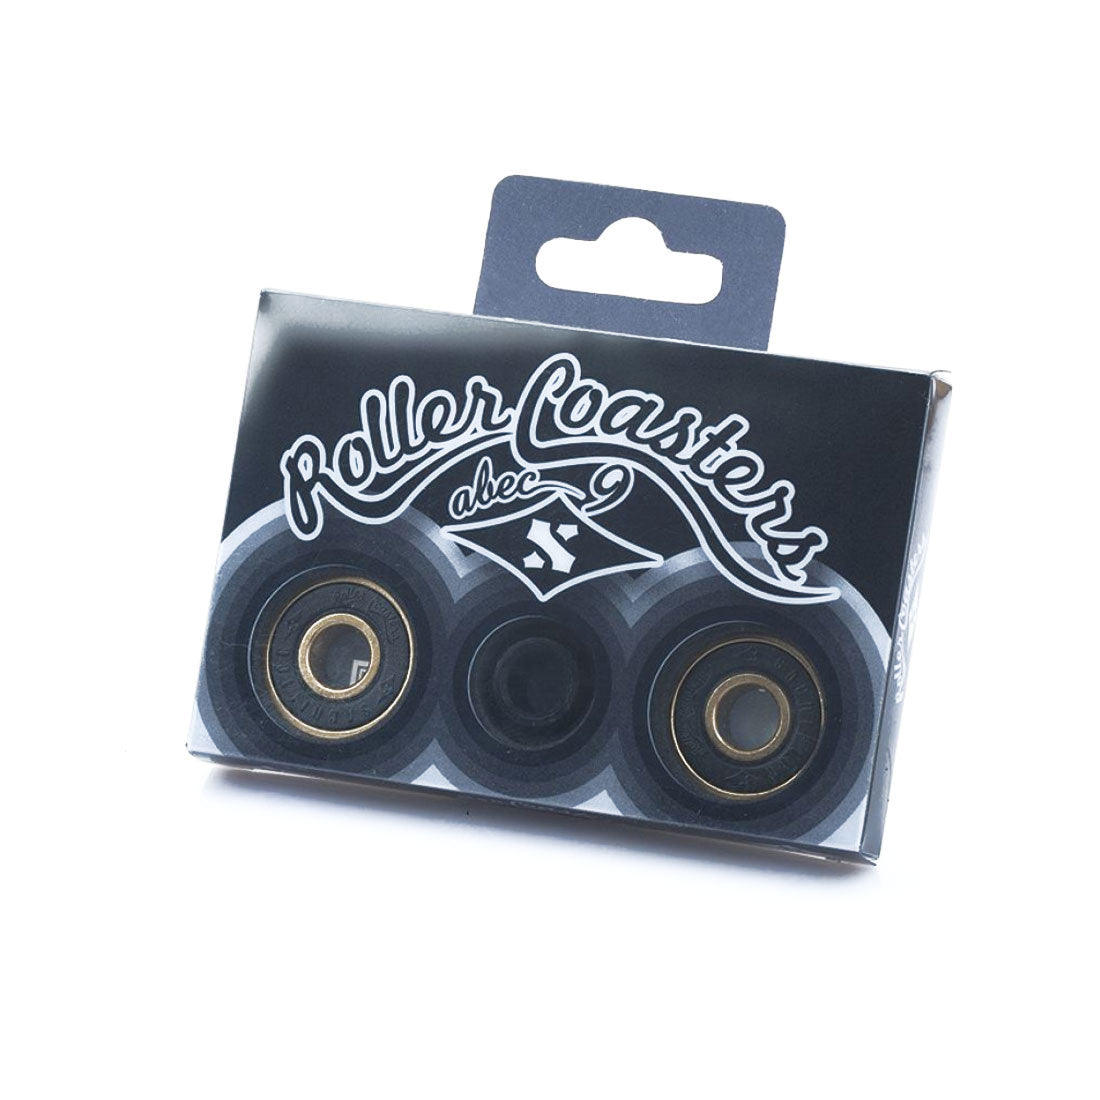 Sacrifice Roller Coasters Abec 9 Bearings - Gold/Black Scooter Hardware and Parts